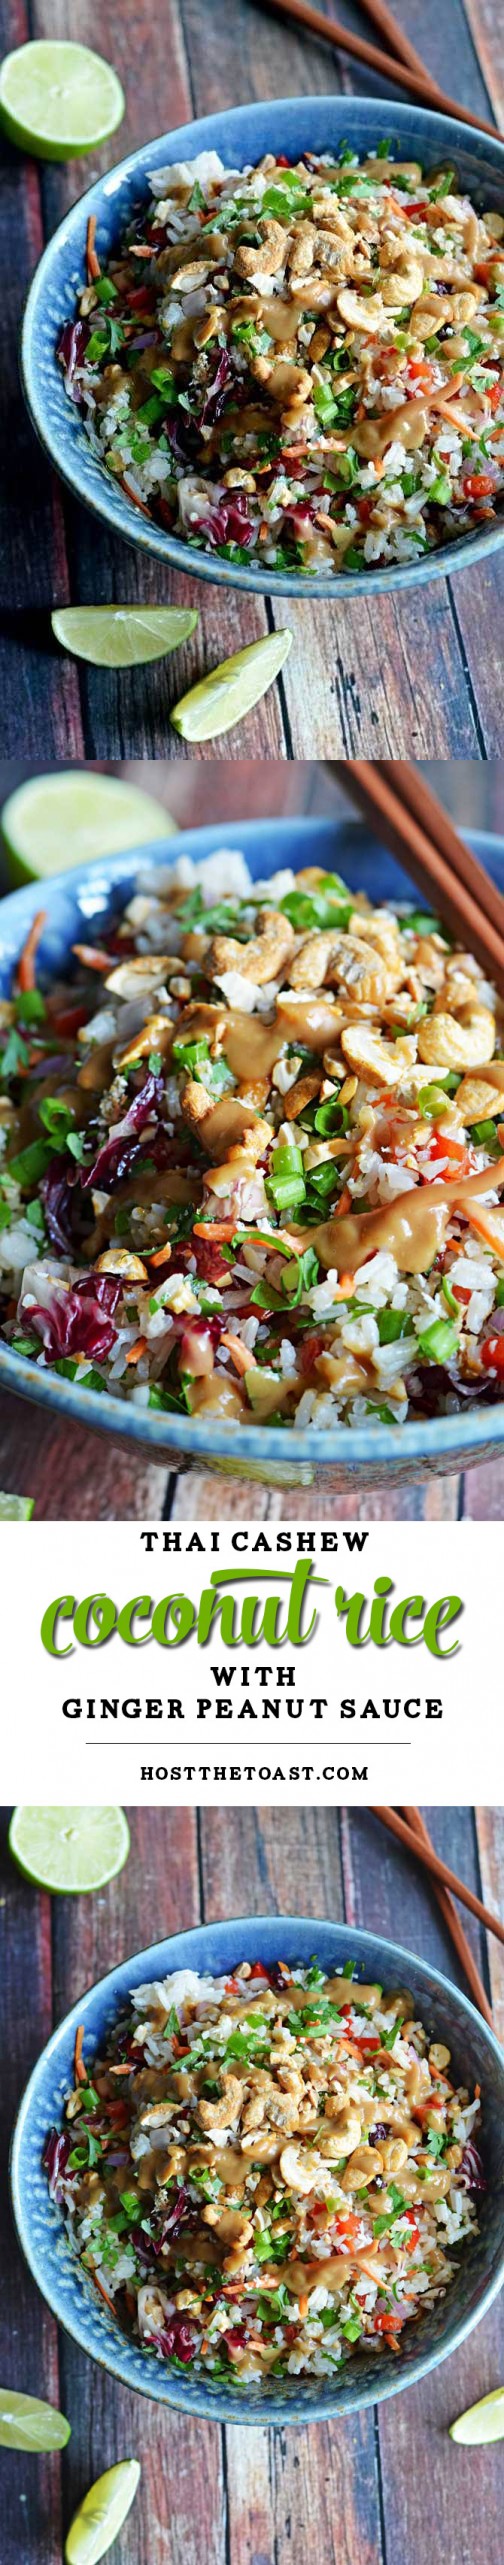 Thai Cashew Coconut Rice with Ginger Peanut Sauce